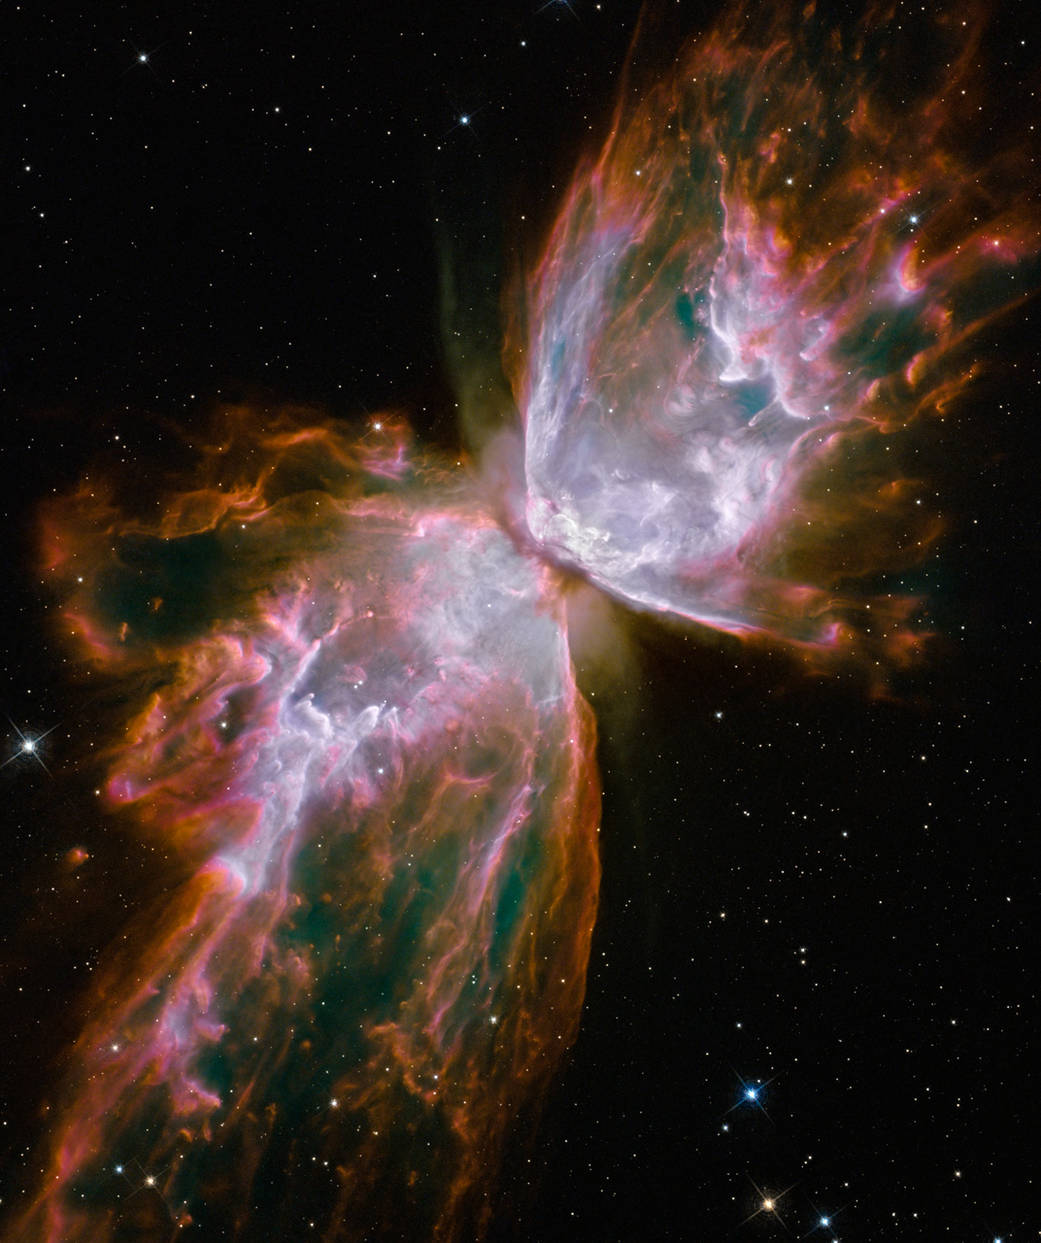 Cloud of gas resembling two large wings narrowed toward center against deep space